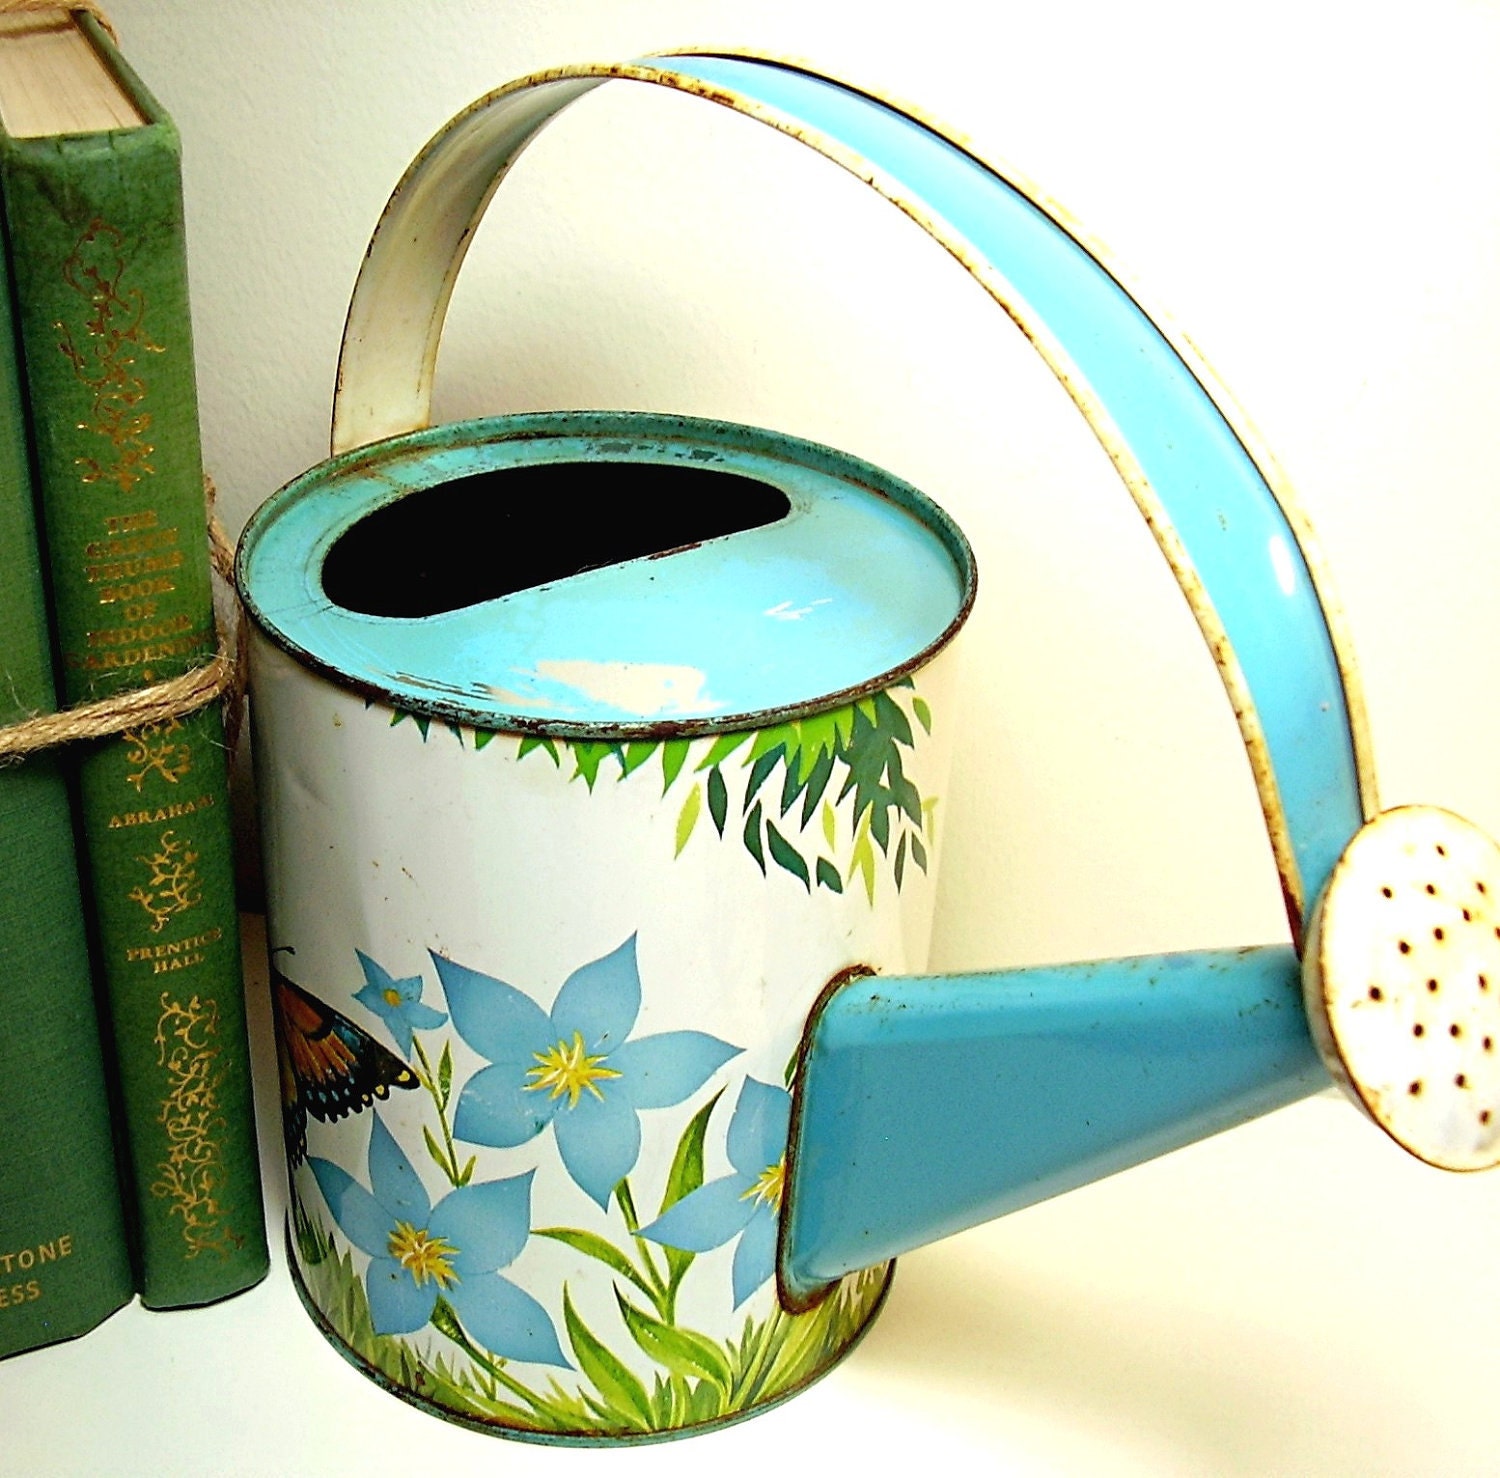 Vintage Watering Can Toy Tin Litho Gardening 1940s Shabby Chic Cottage Nursery Vintage Spring Home Decor